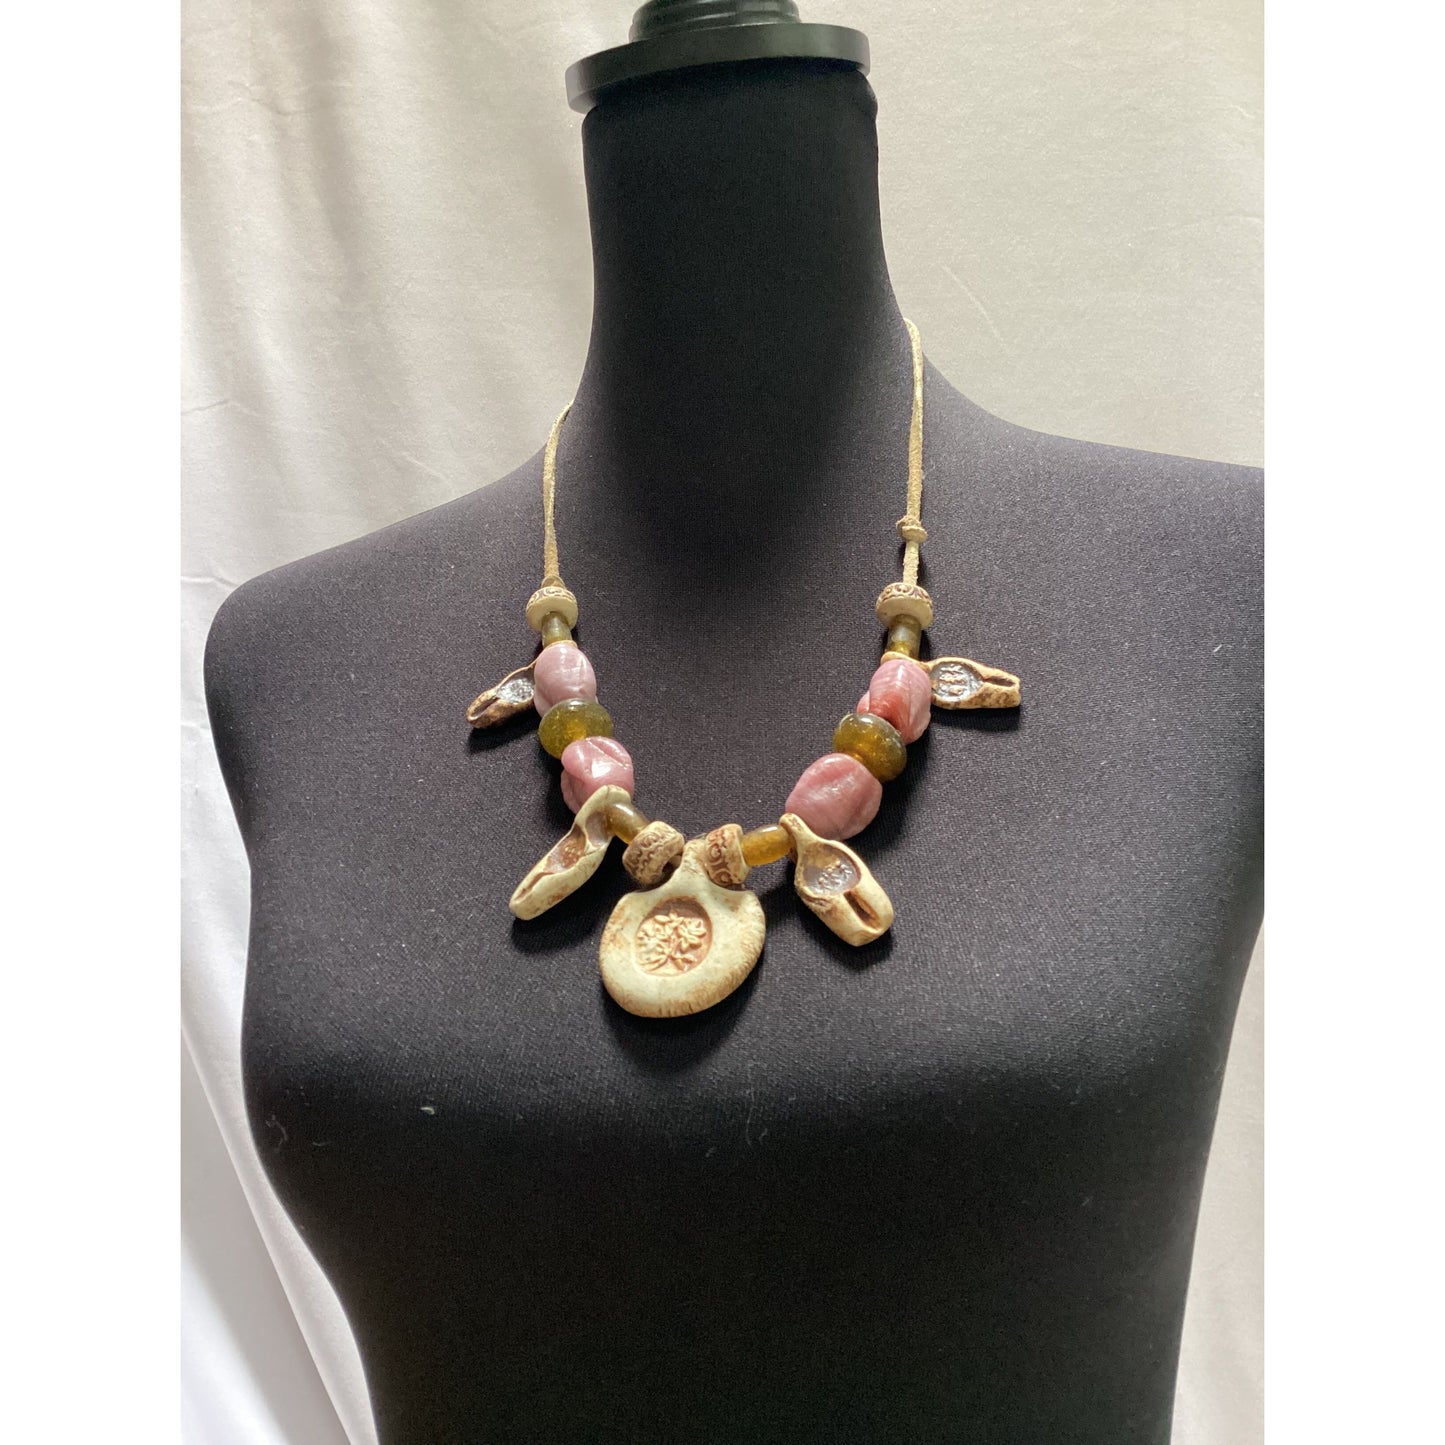 Necklace made of beads and ceramic pieces. Strung on rawhide